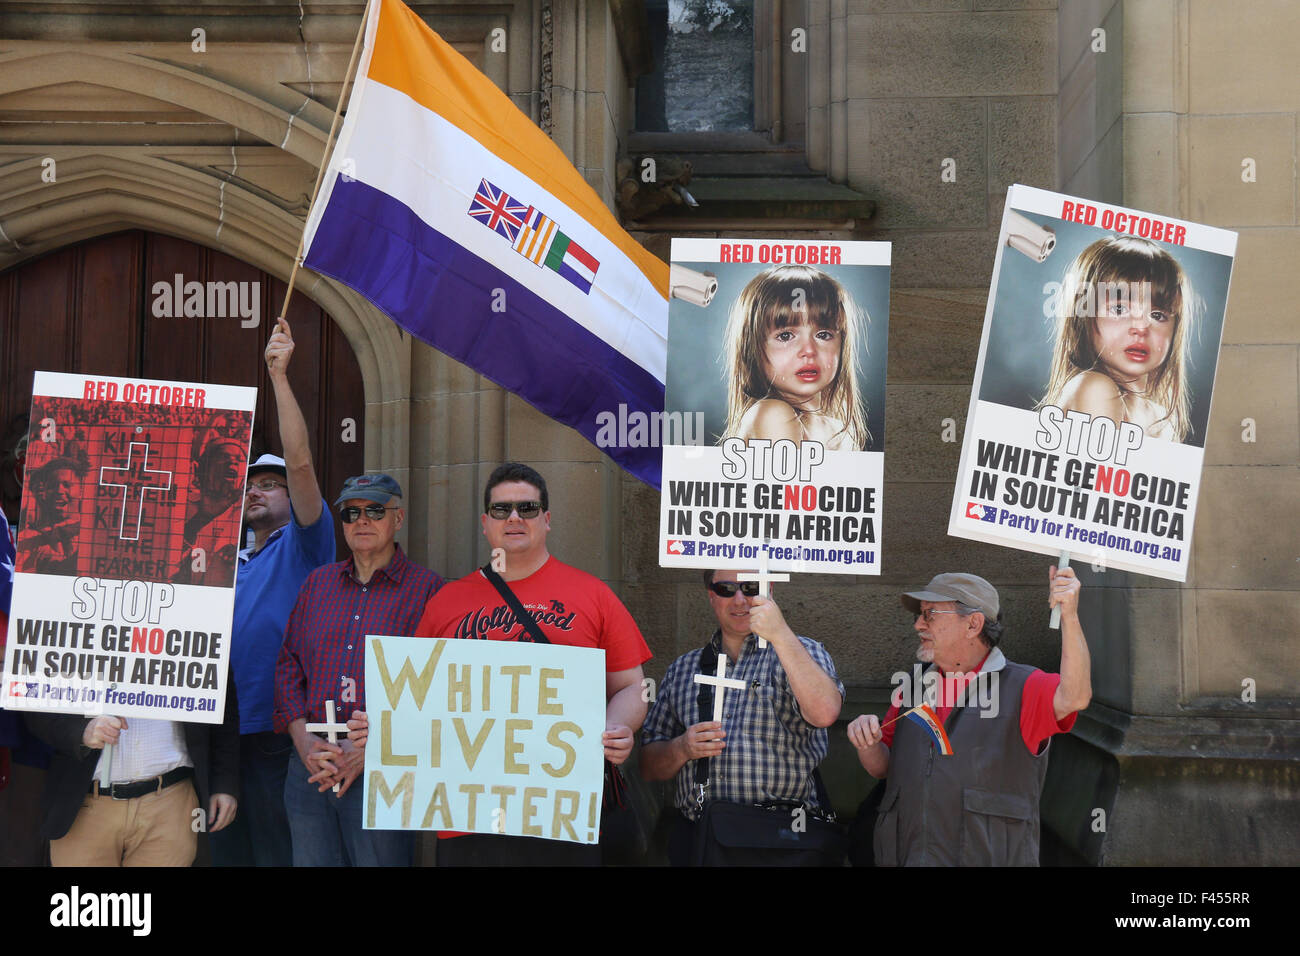 Sydney, Australia. 19 April 2016. Party for Freedom organised a Red October rally against white genocide in South Africa. Stock Photo